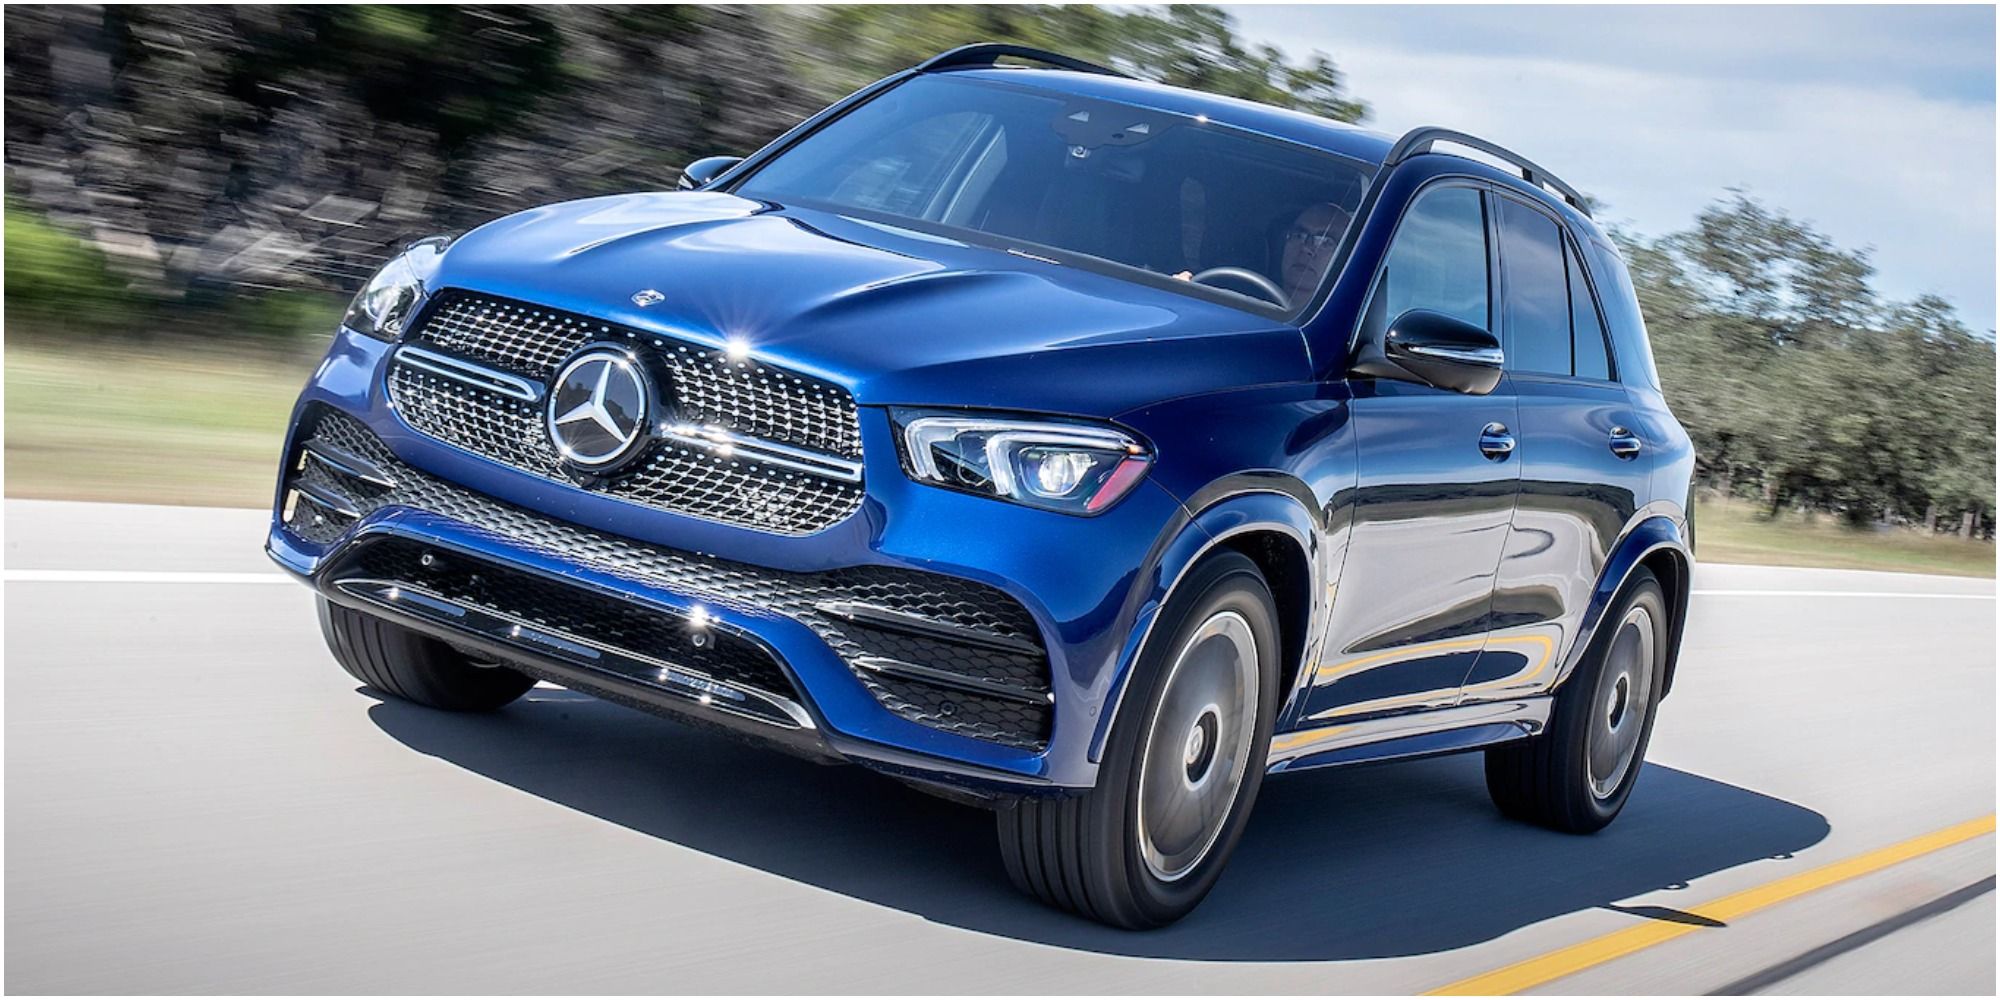 10 Best SUVs On Sale in 2019 (According to Edmunds)